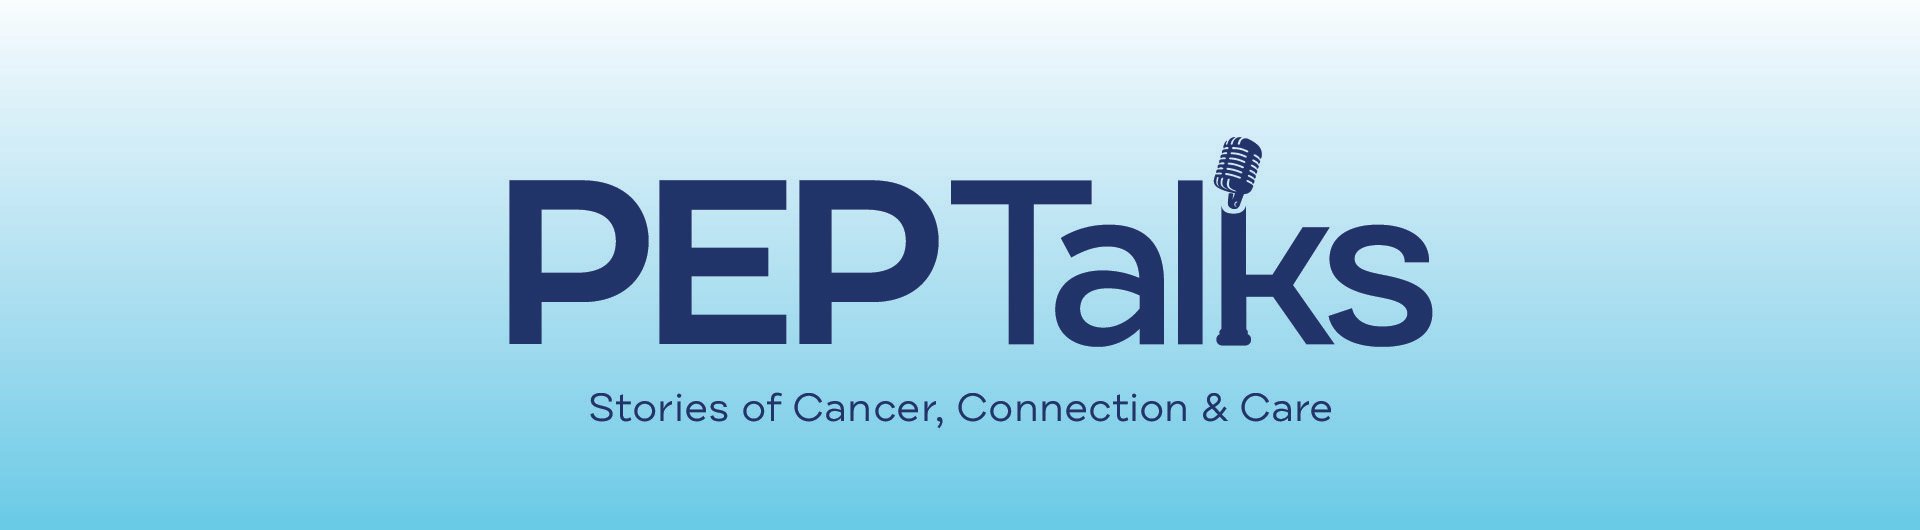 Pep Talks - Stories of Cancer, Connection and Care